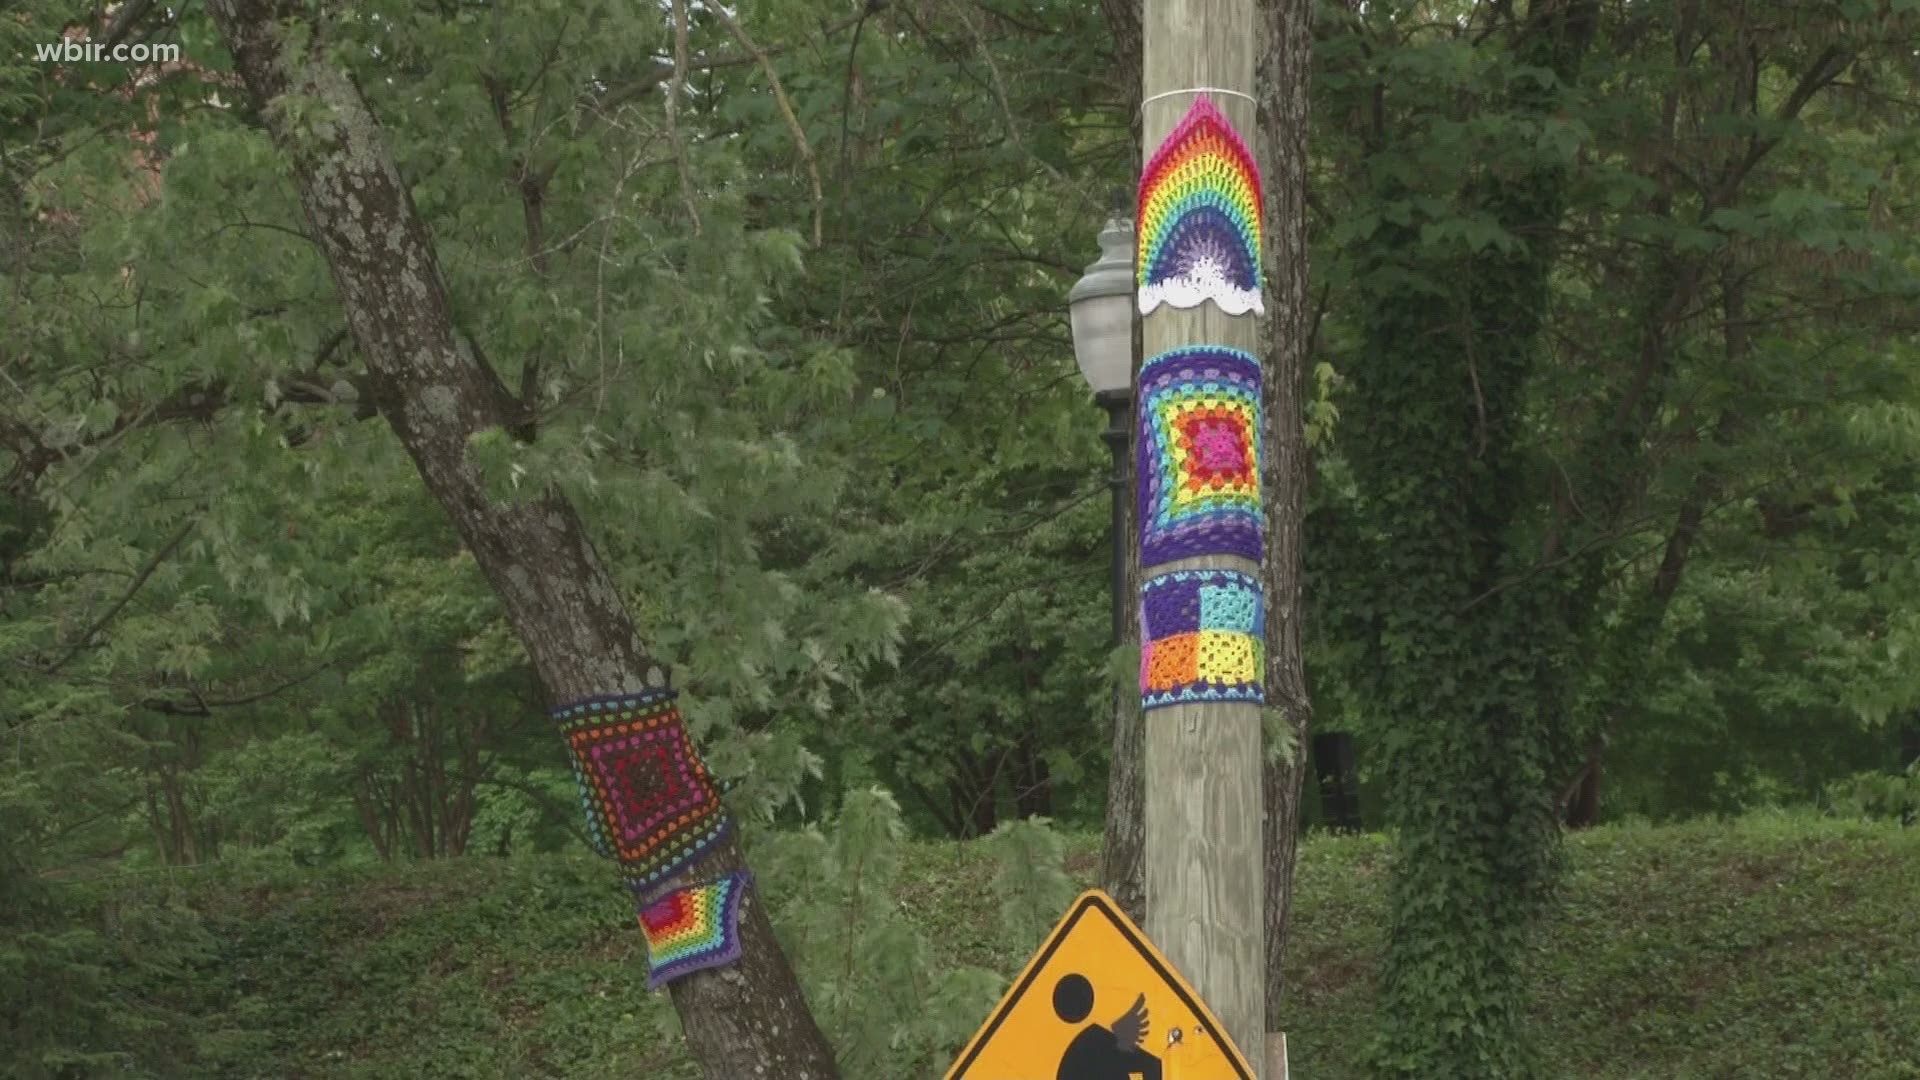 Near UT's campus, there is a little bit more color after a student put "yarn bombs" on poles in the area.